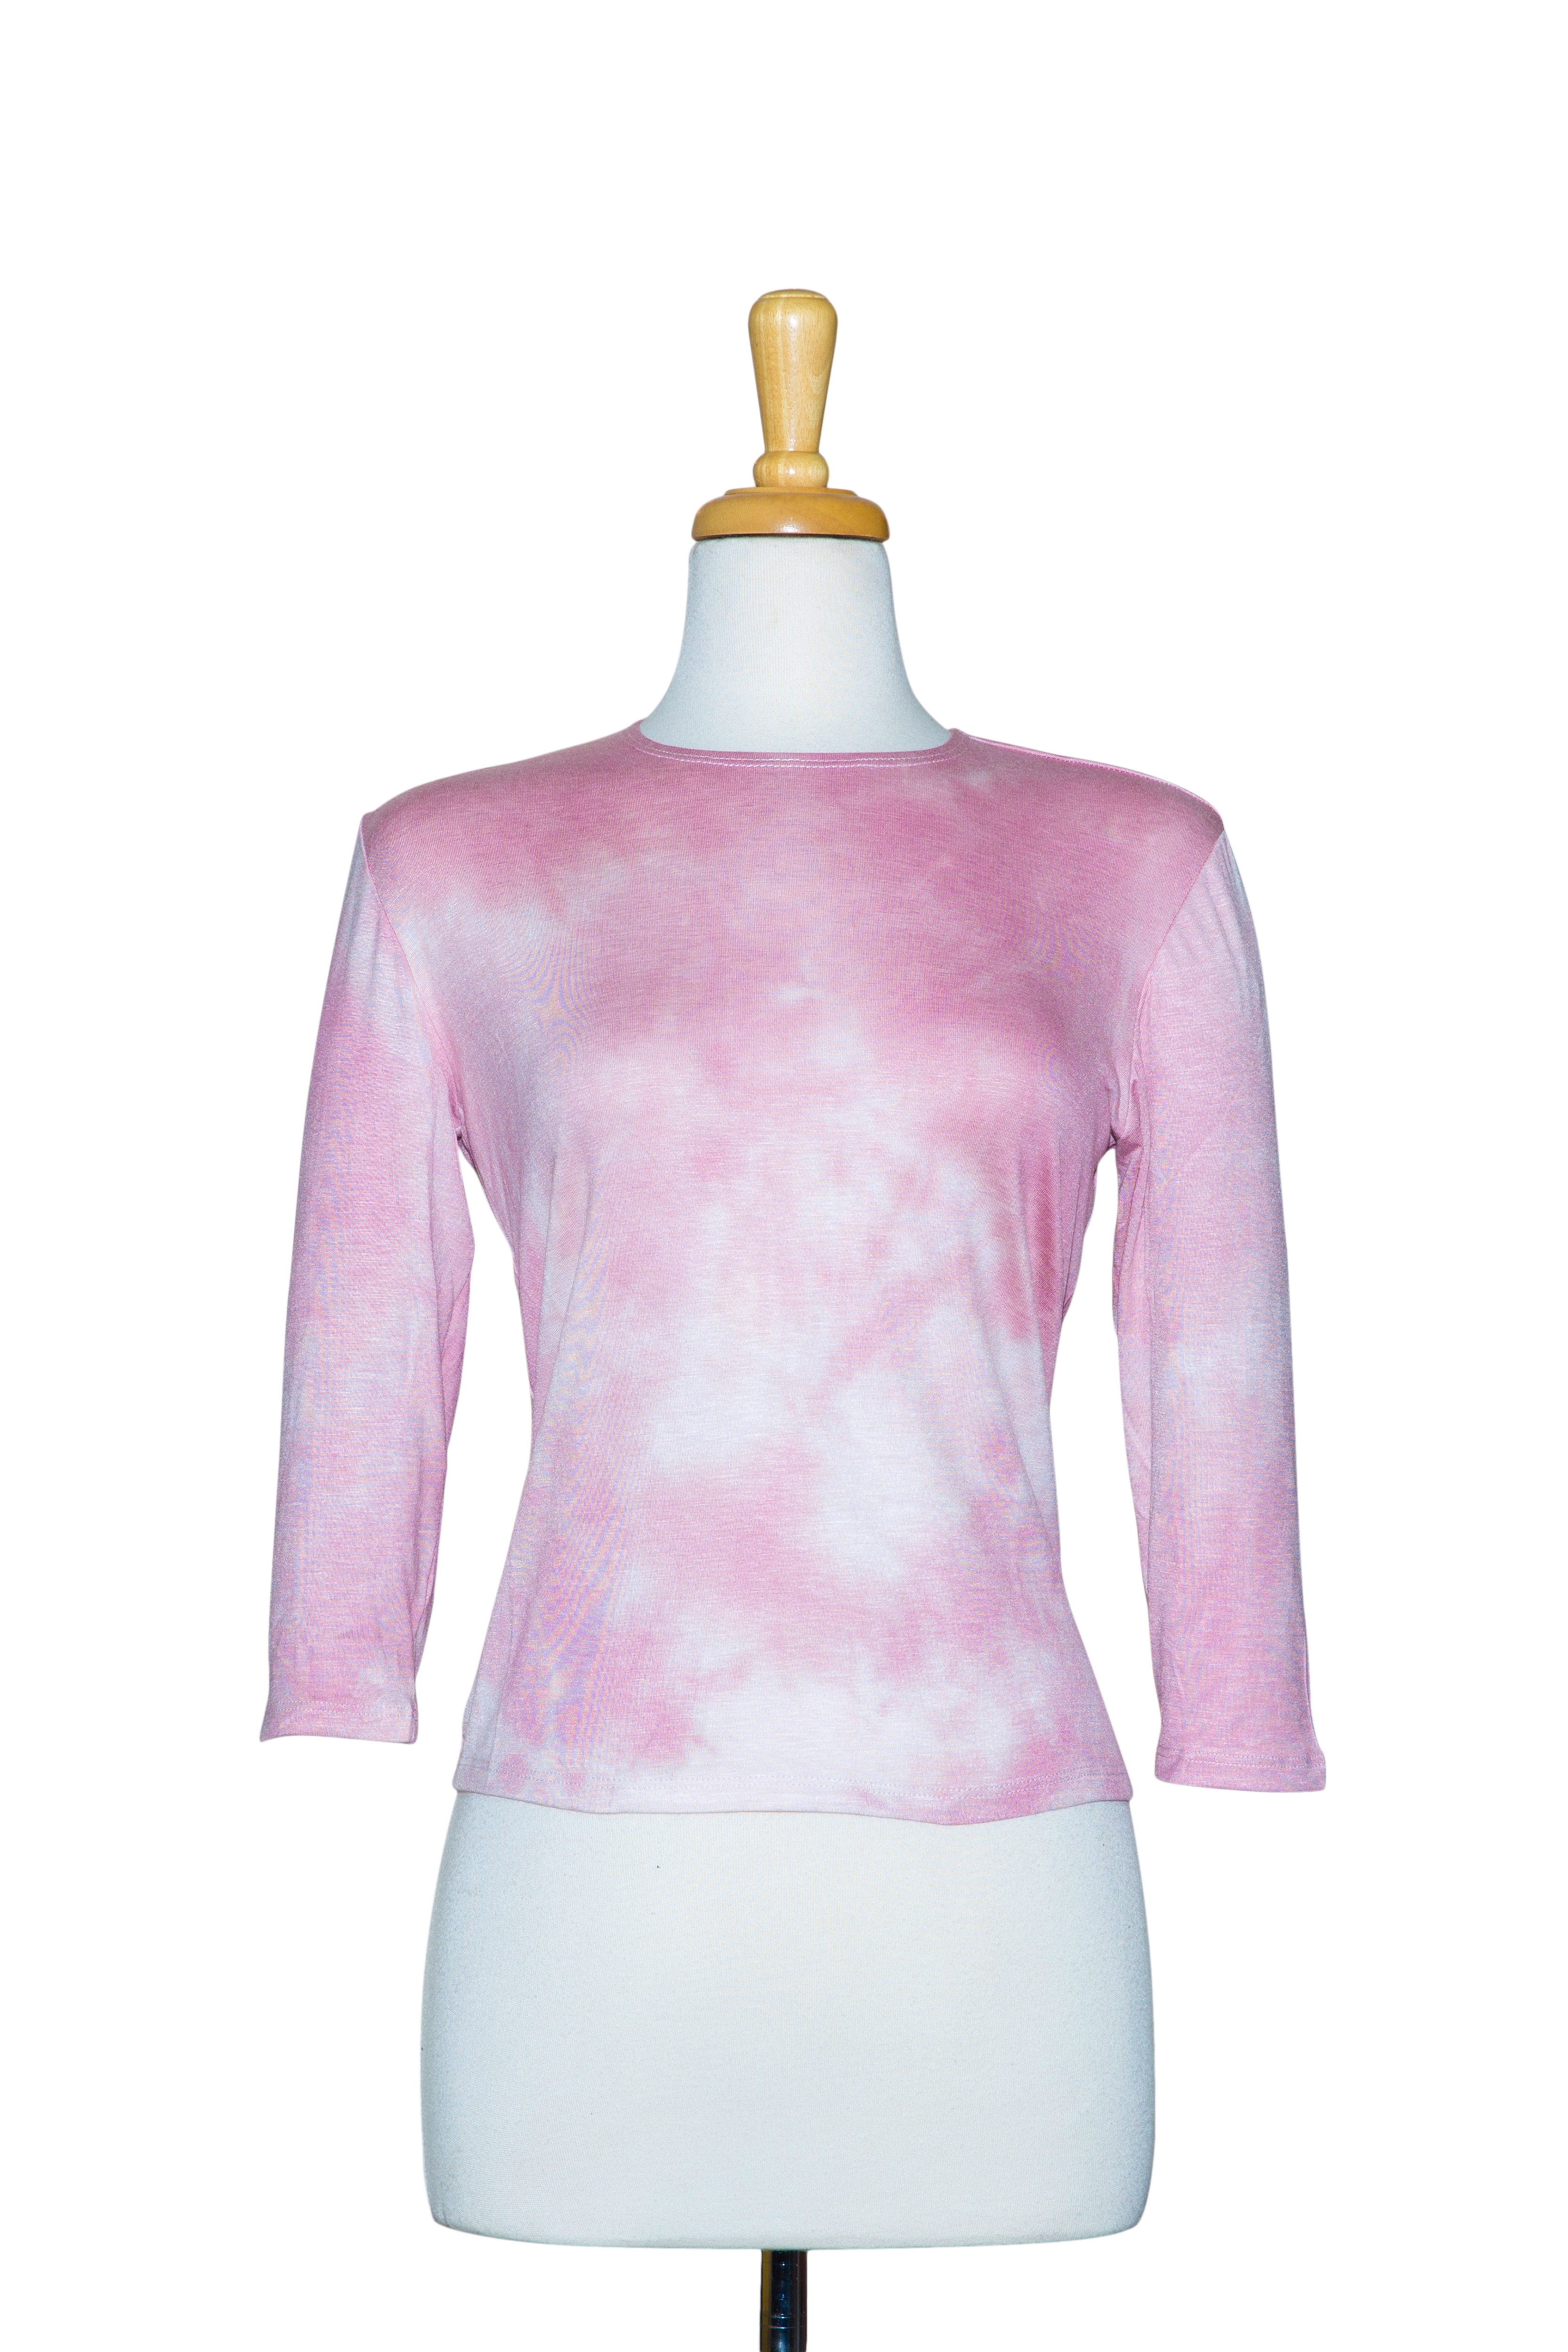 Plus Size Mauve and Ivory Tie-Dye 3/4 Sleeve  Cotton Top 